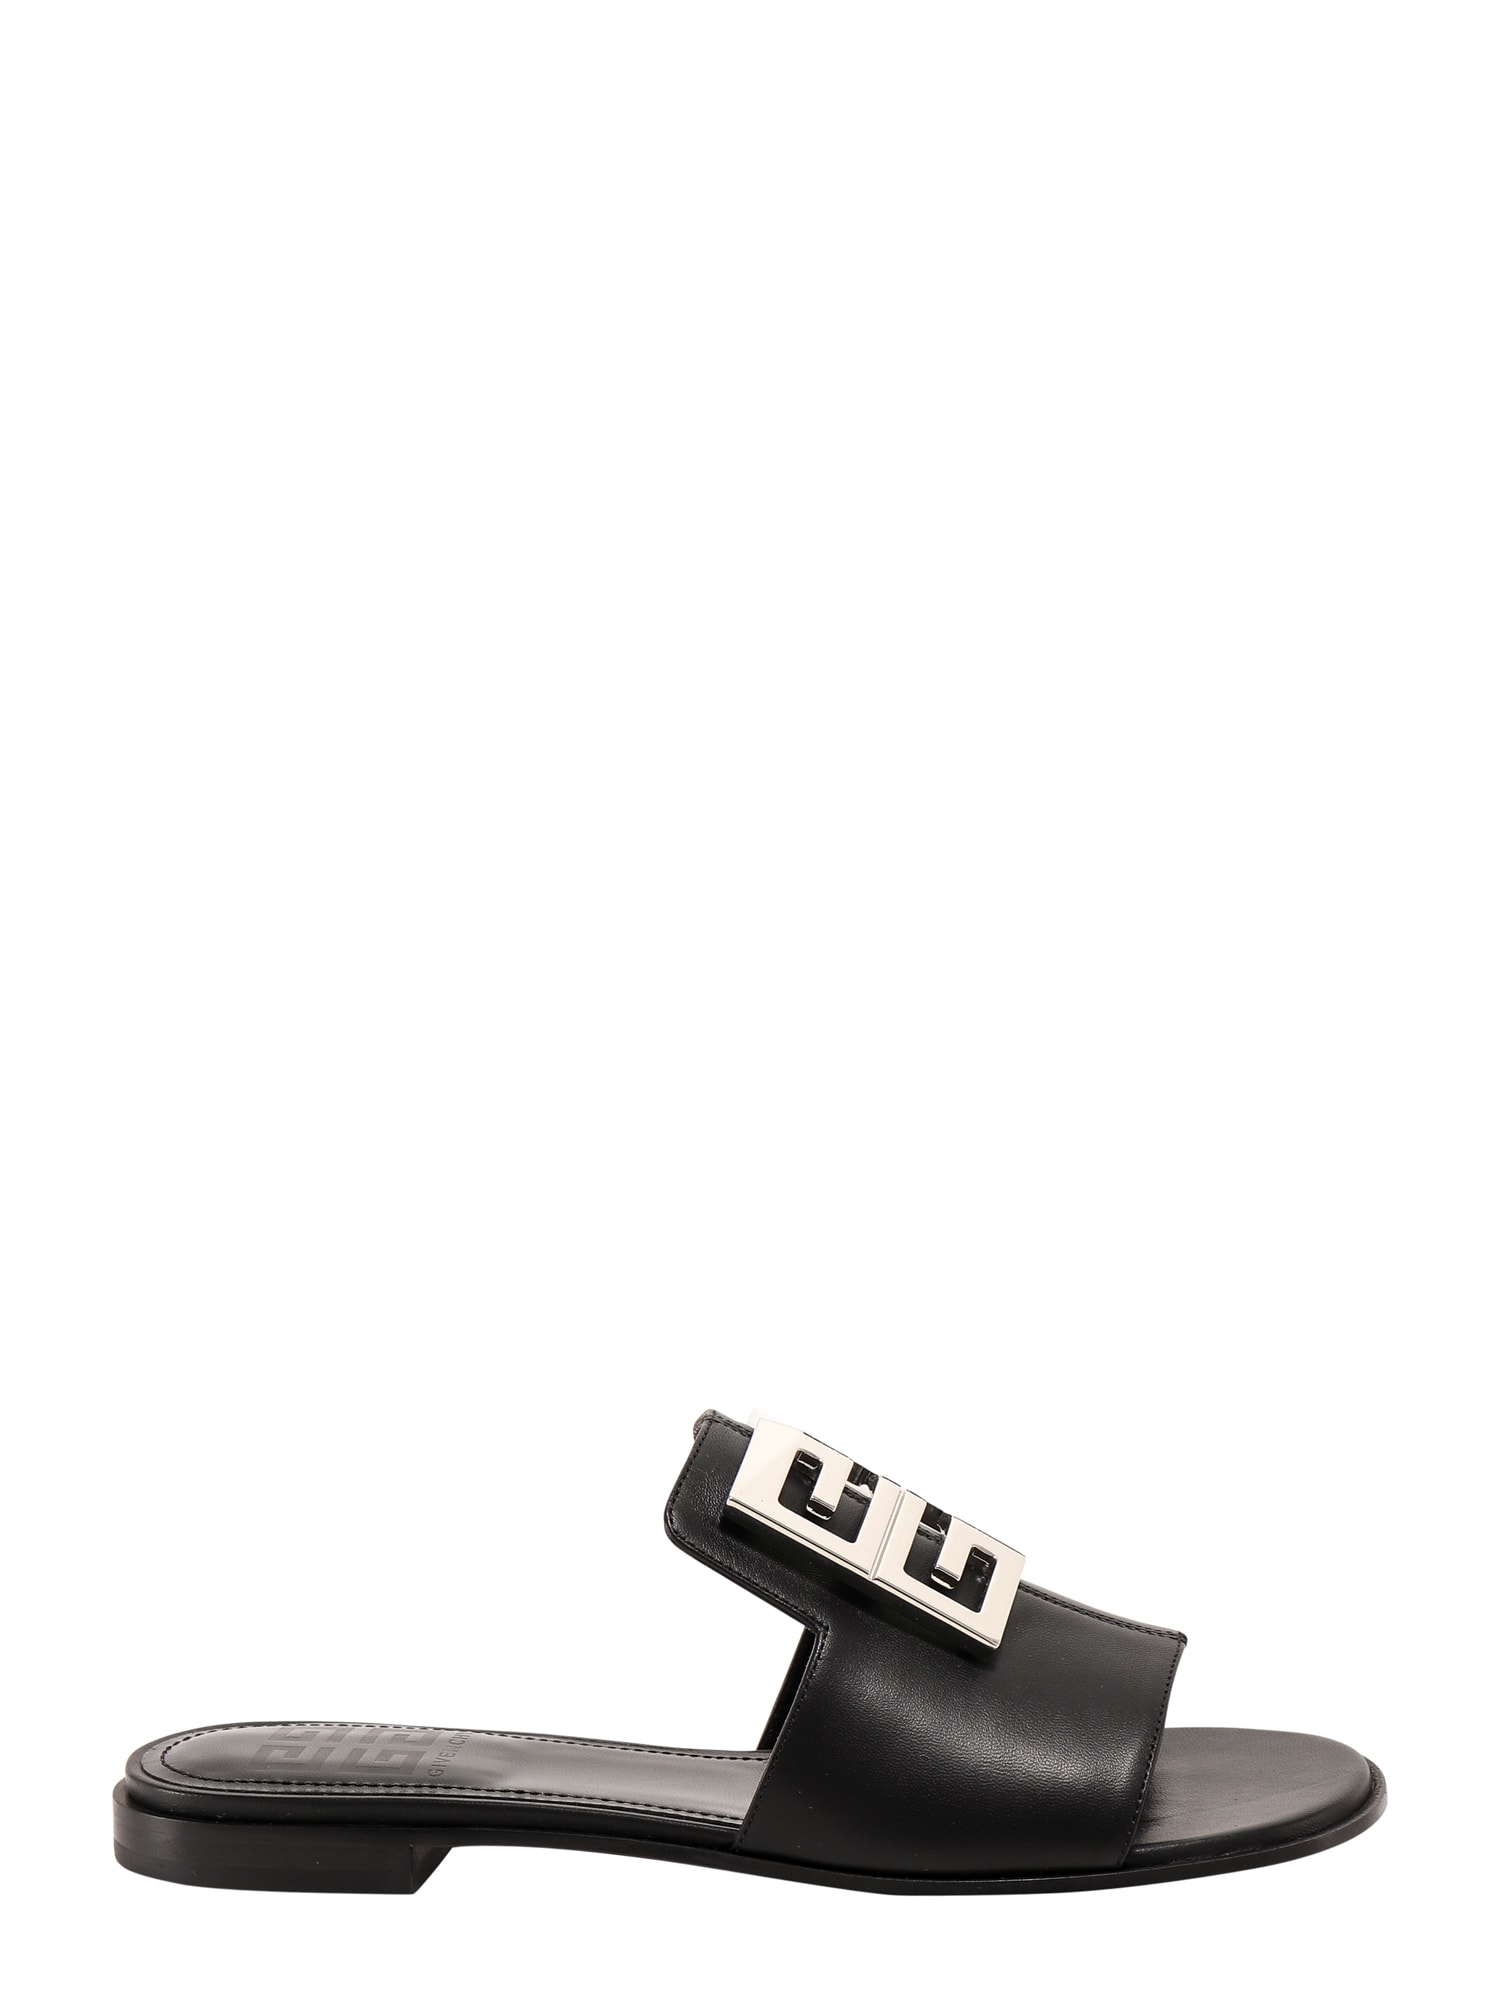 Buy Givenchy Flat Sandals online, shop Givenchy shoes with free shipping